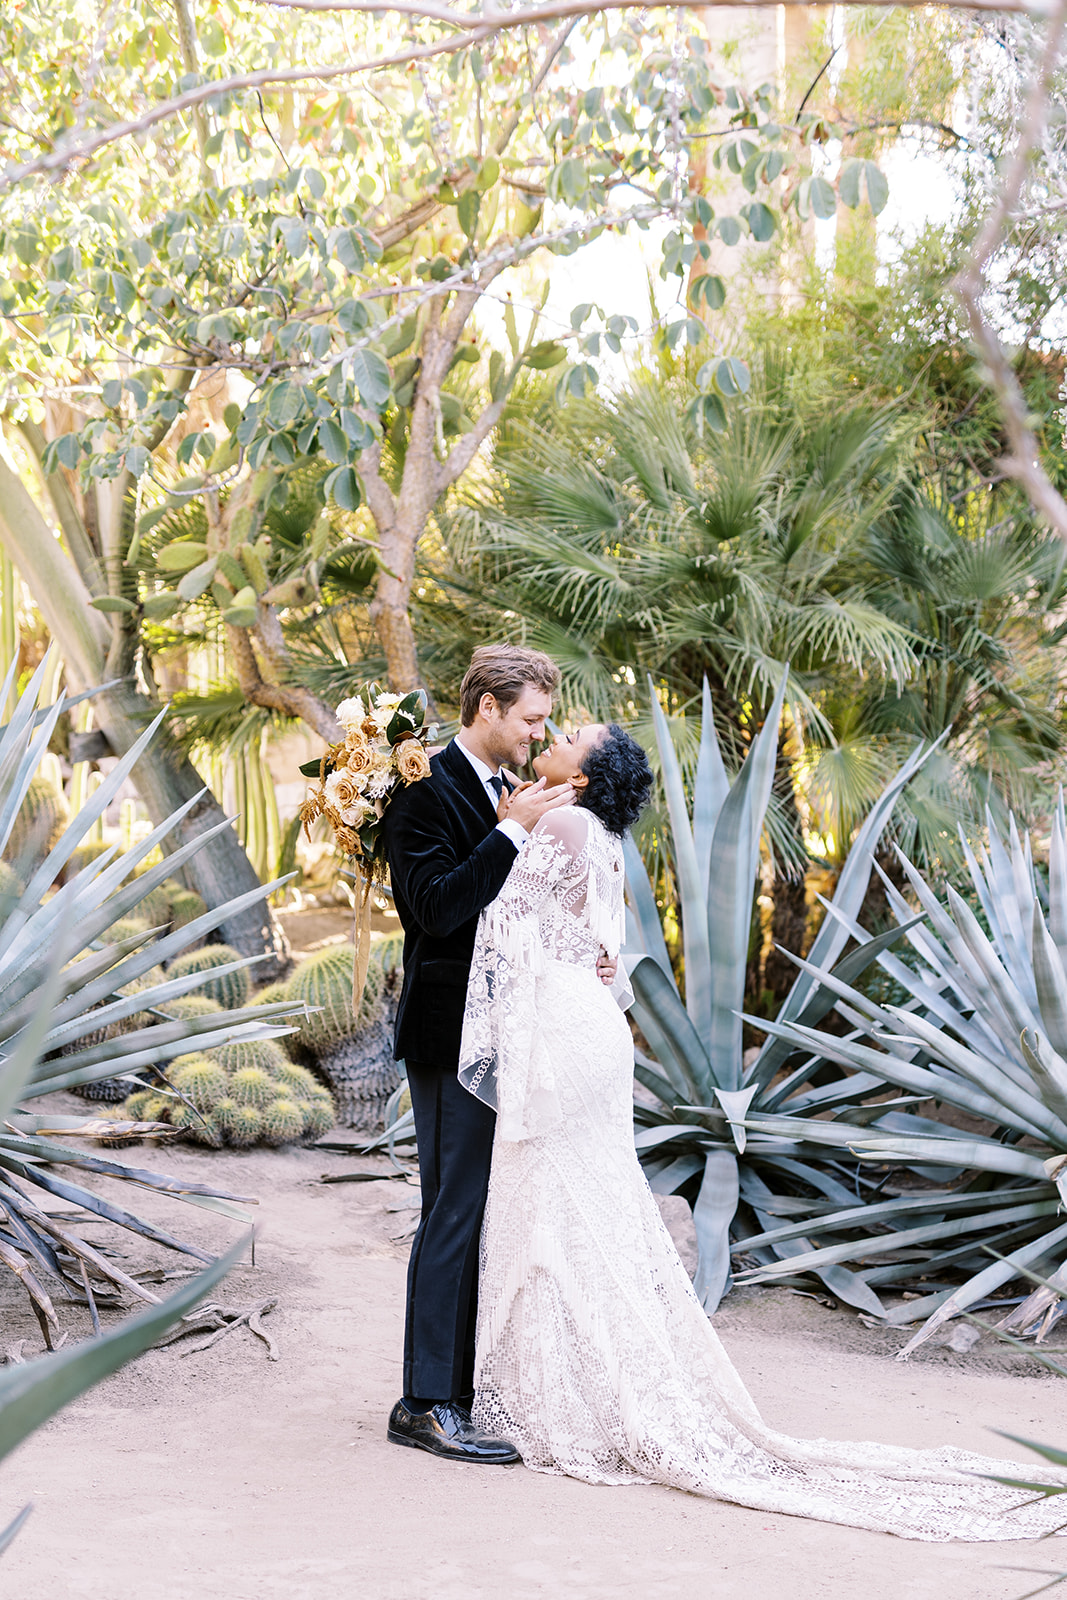 Man and woman hugging while looking into each others eyes while surrounded by desert plants. Woman has curly dark hair while man has light brown colored hair that is medium length. Elopement in the desert. Elopement photographer in Texas